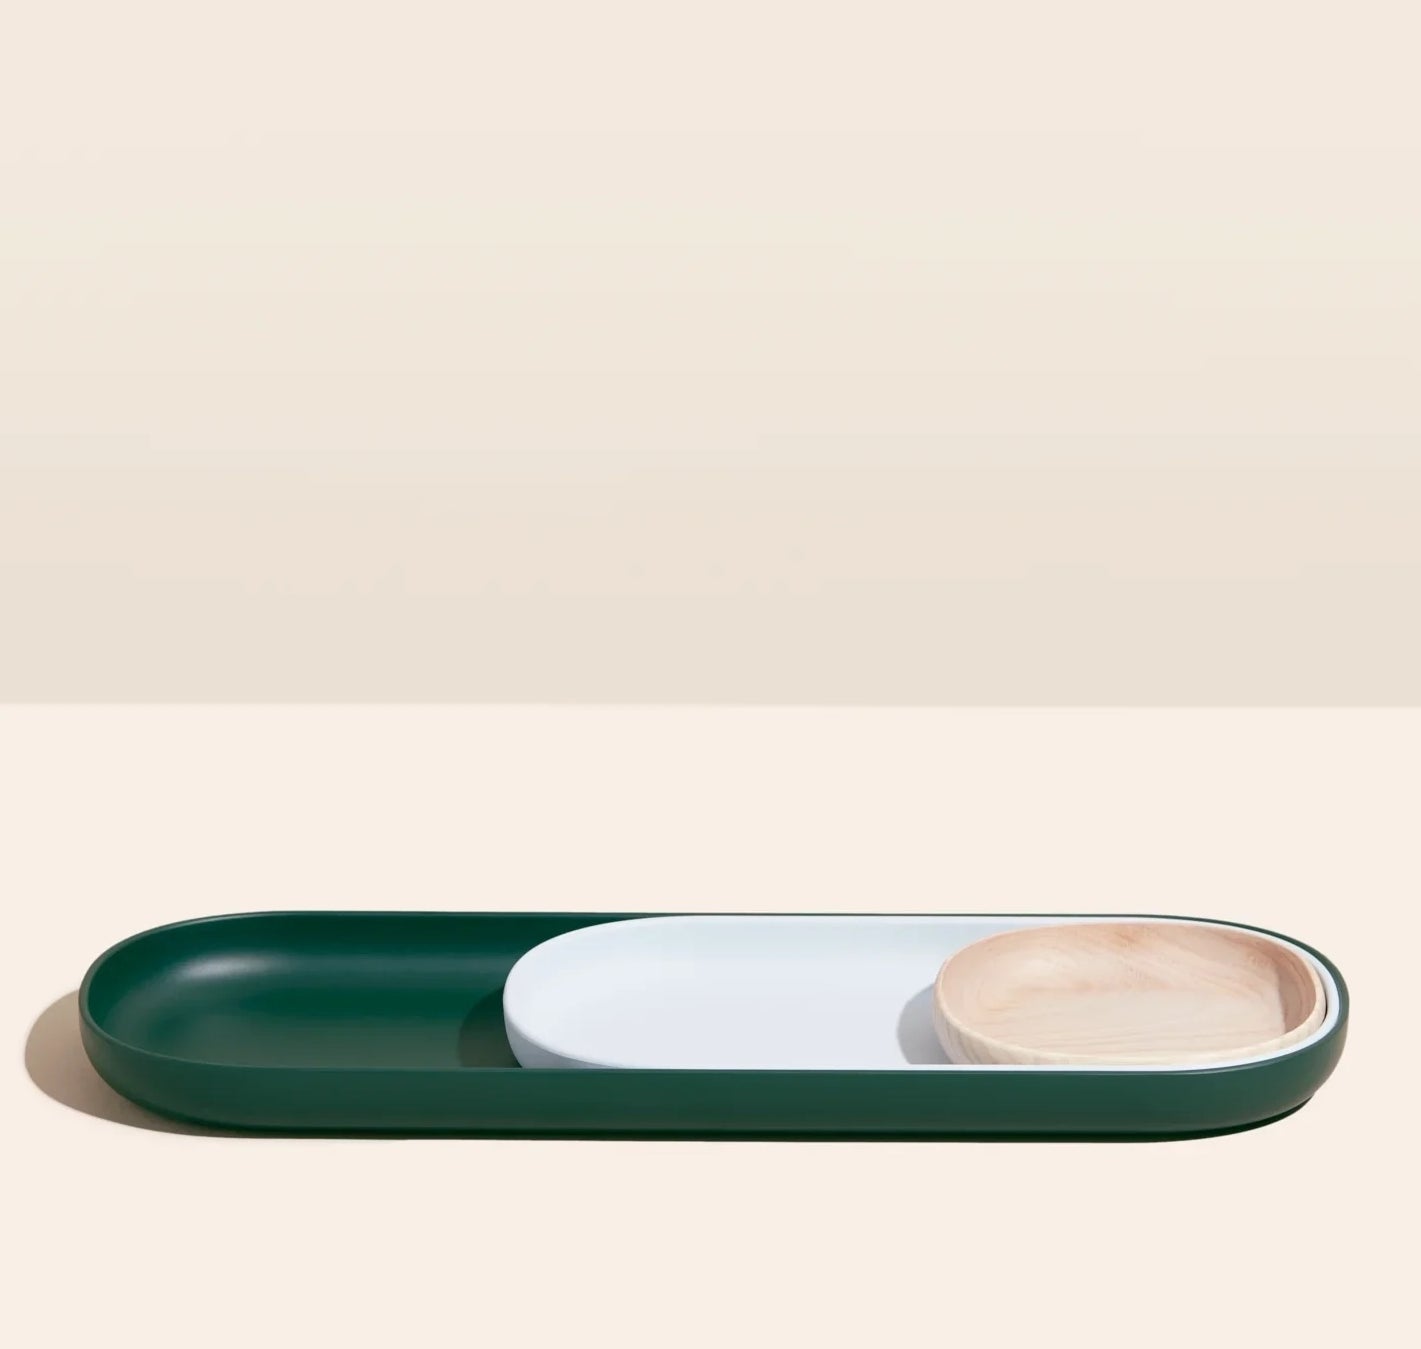 flat oblong nesting trays in natural light wood, light grey, and dark green